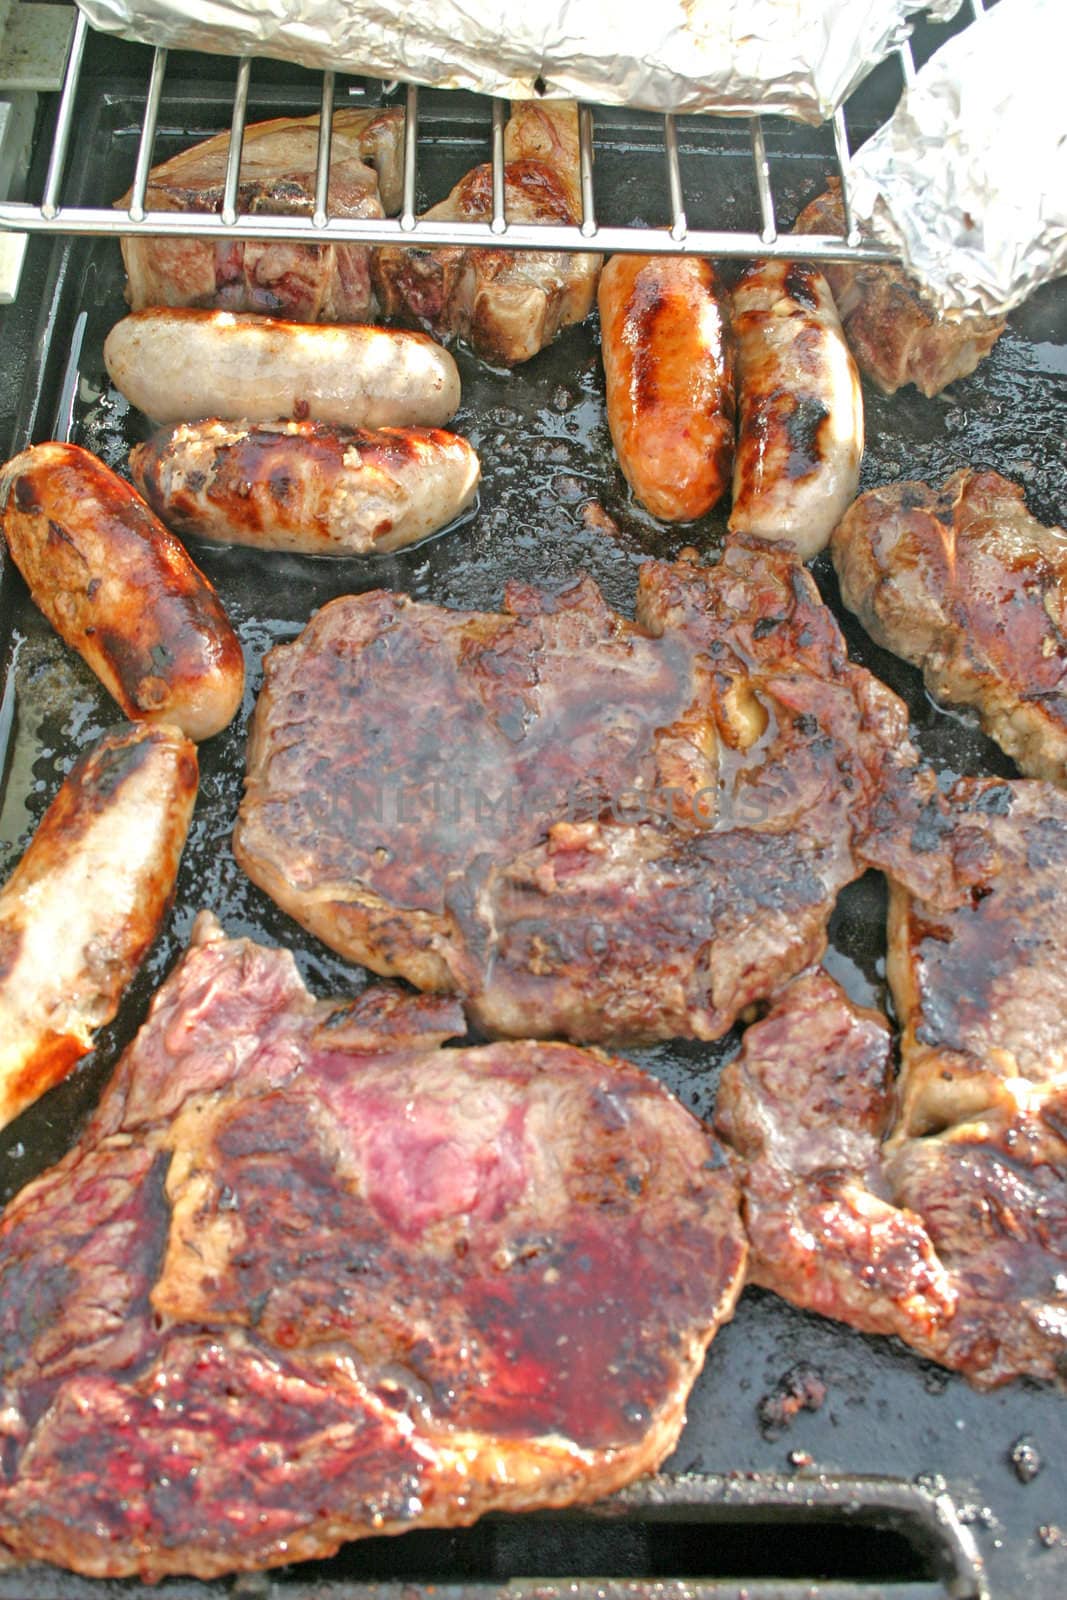 Sizzling Meat on Summer Barbecue